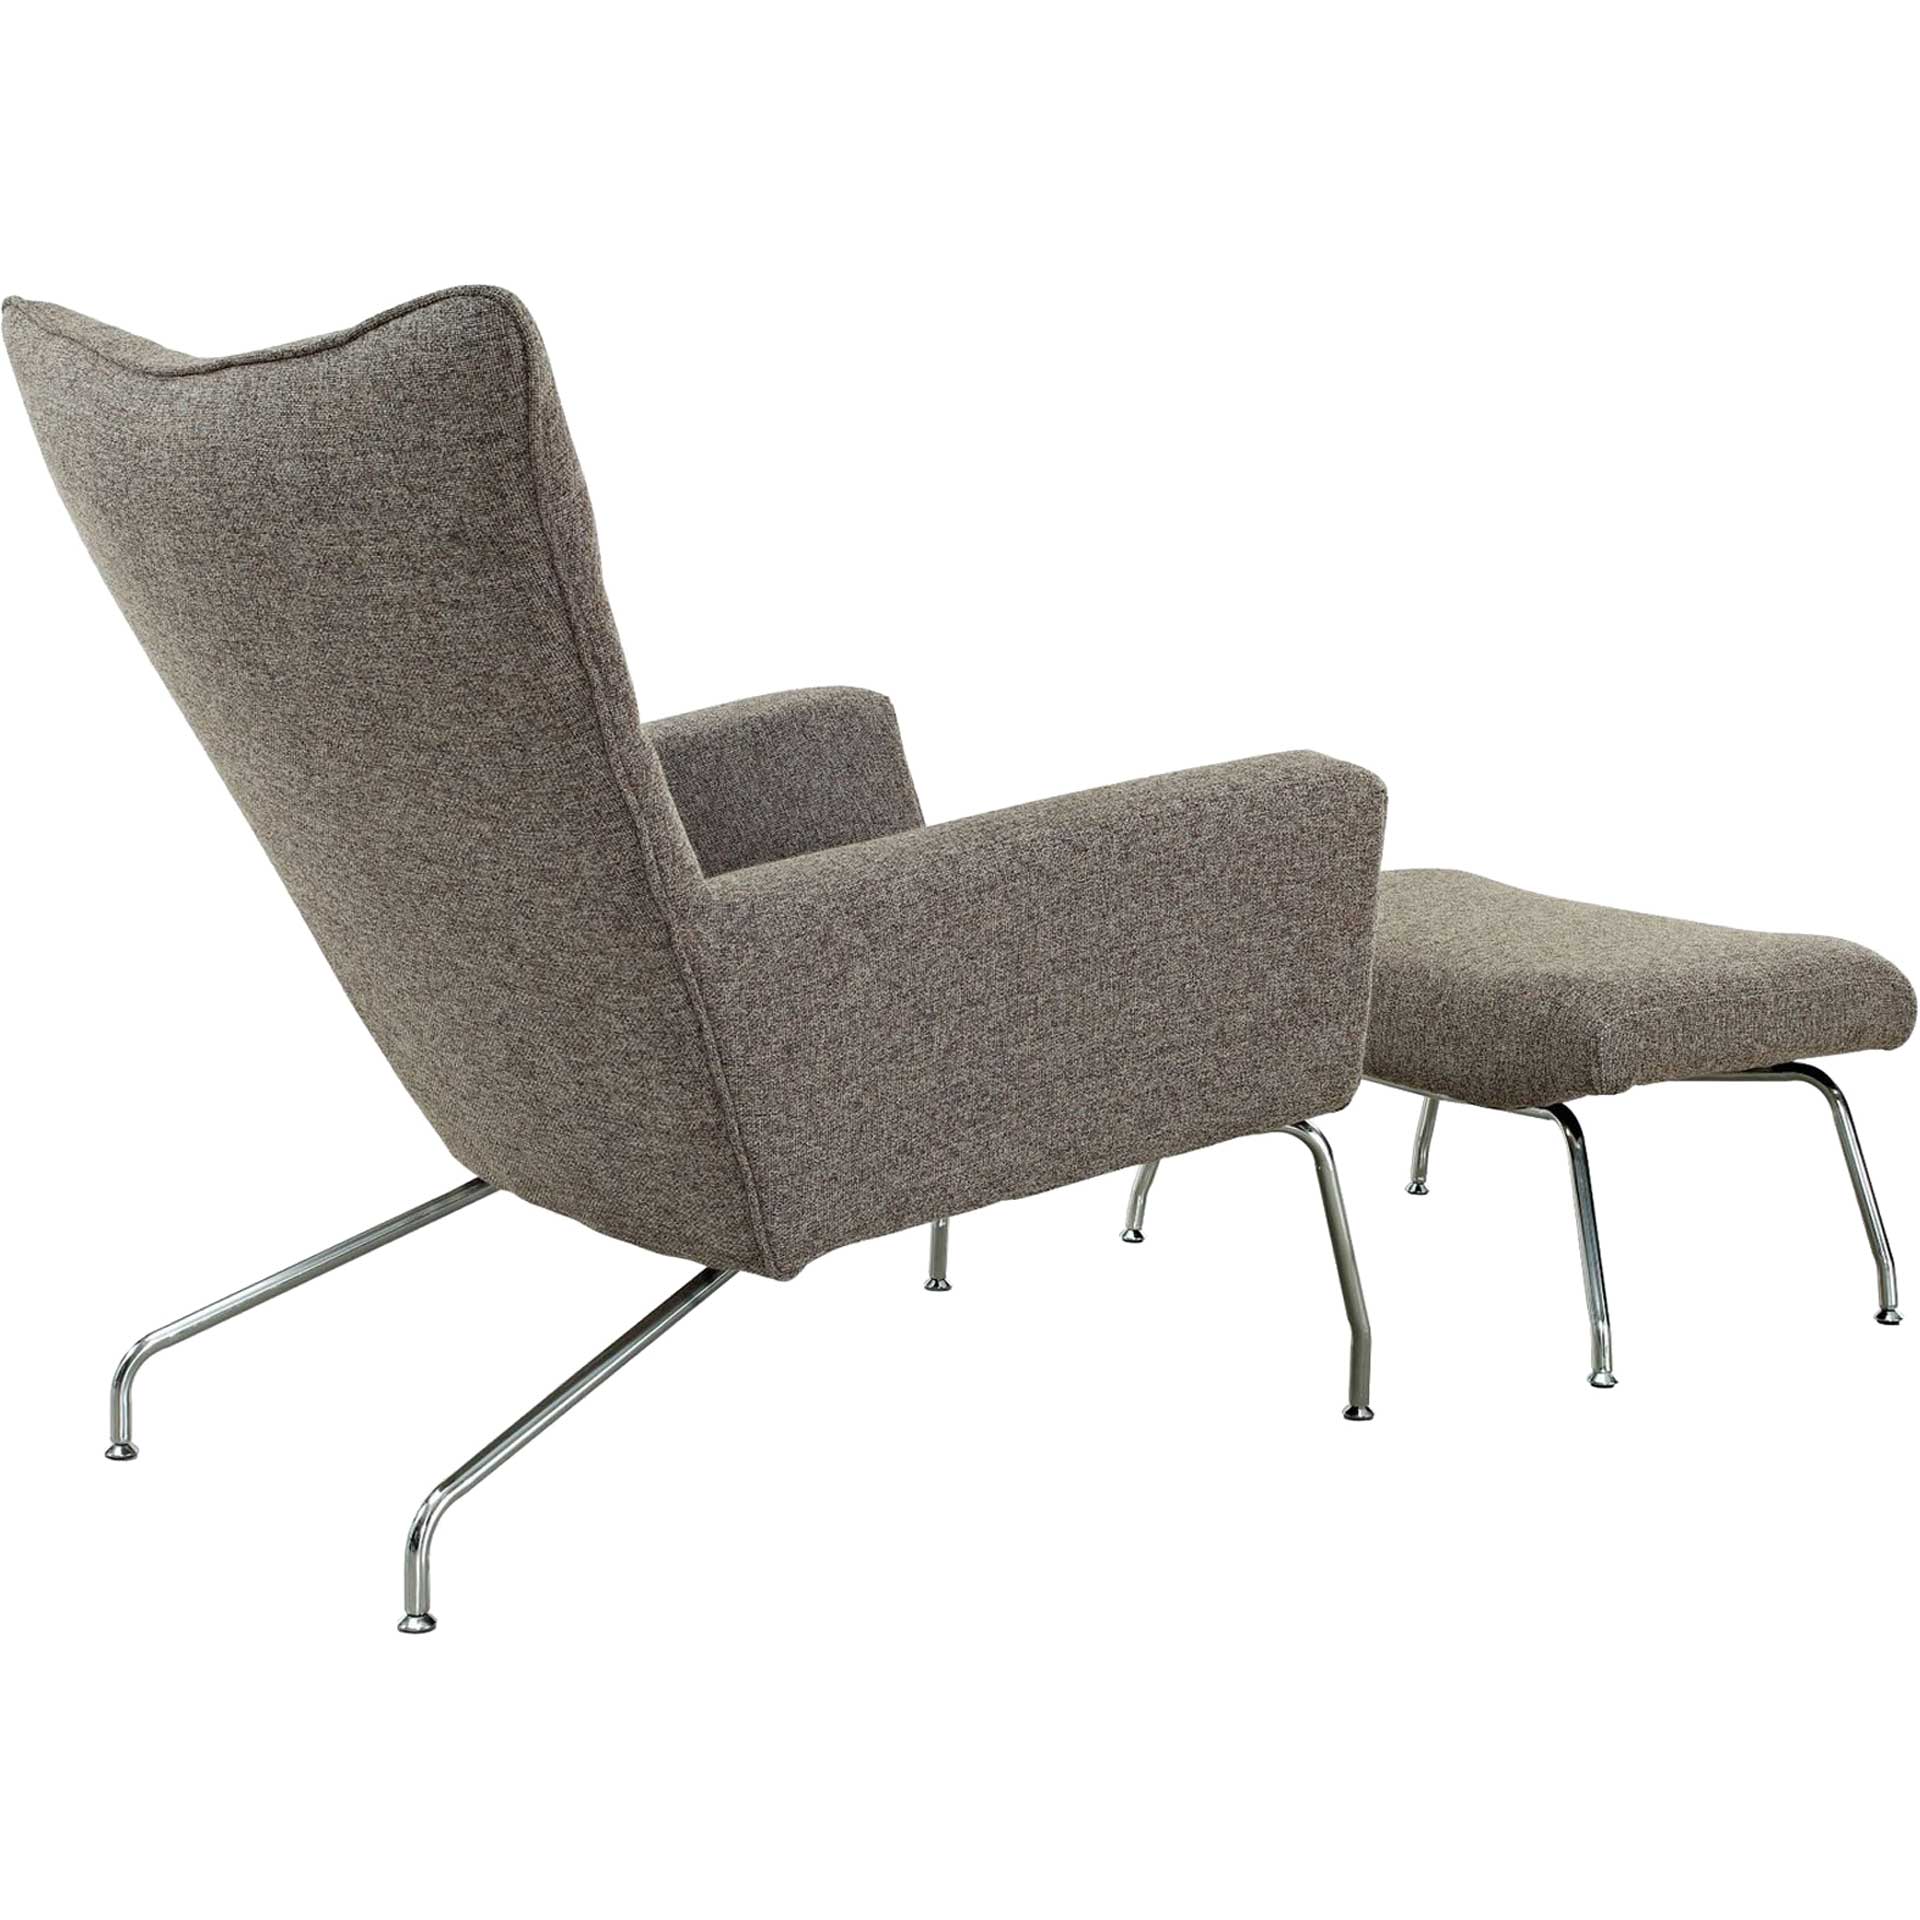 Clarell Lounge Chair Oatmeal